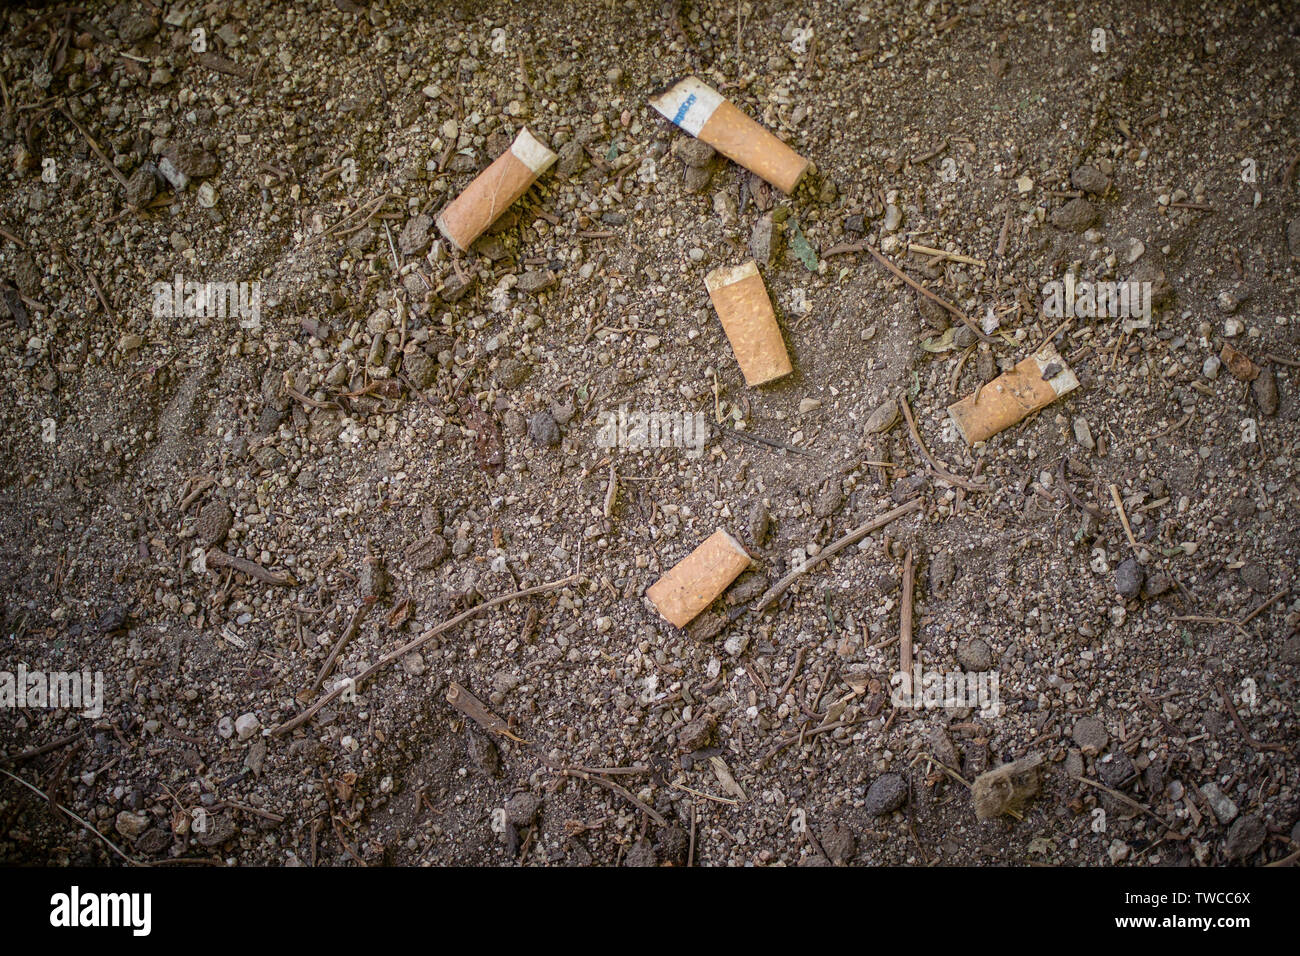 Five discarded cigarette ends on dirt path in park, Madrid, Spain Stock Photo